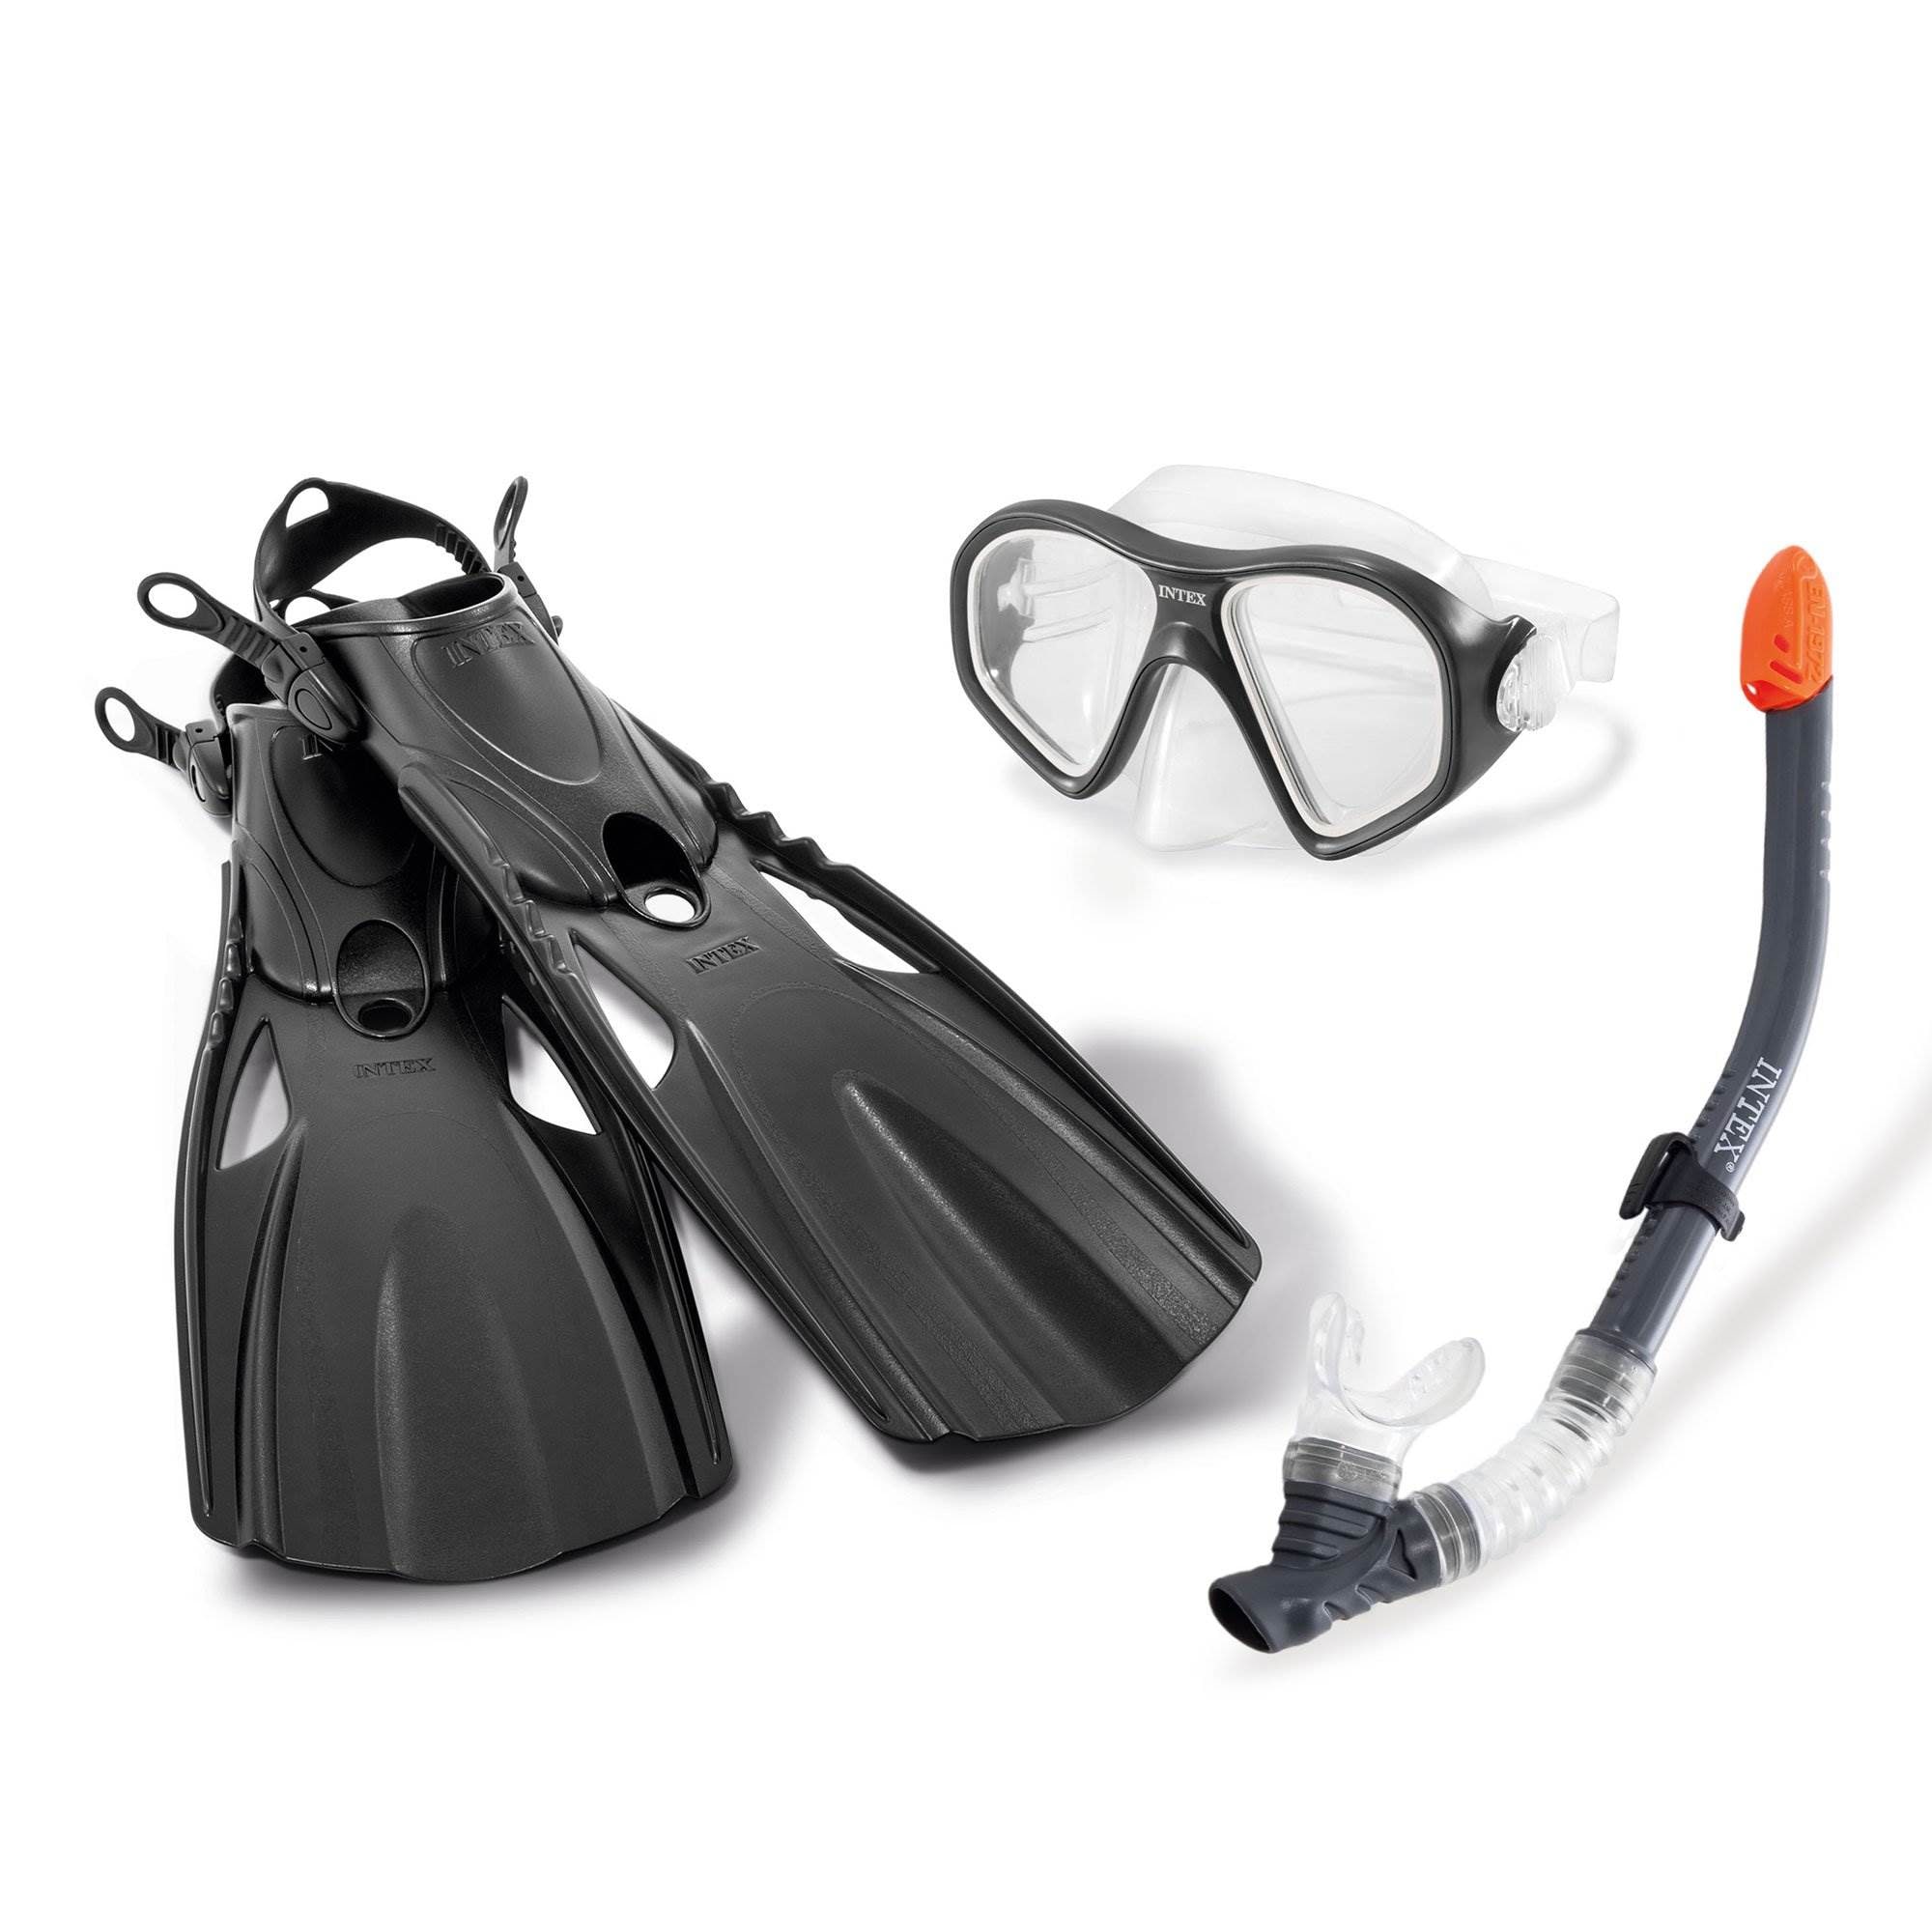 Swim mask and snorkel set New for youth/adult in 3 colors: blue black pink 